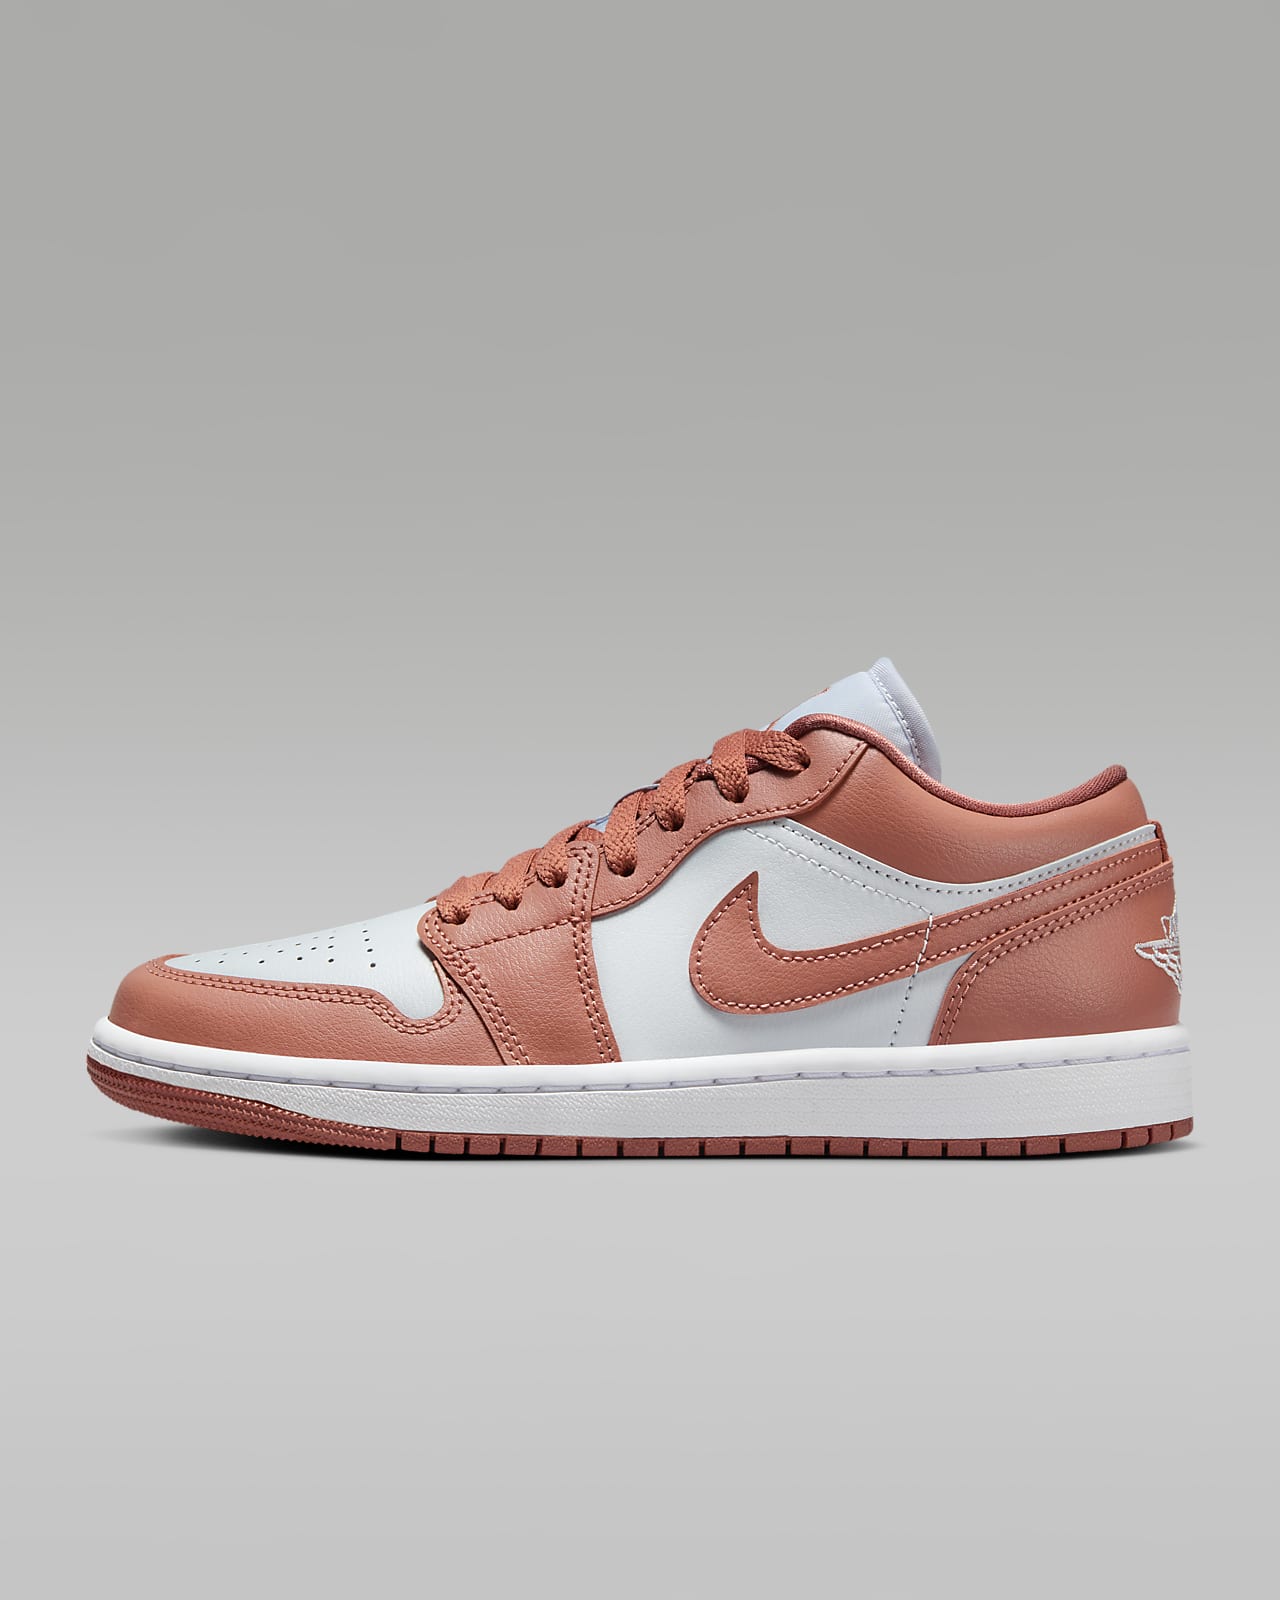 Stepping into Style: Why Air Jordan 1 Low Womens Shoes Are the Ultimate Trendsetters Dream!